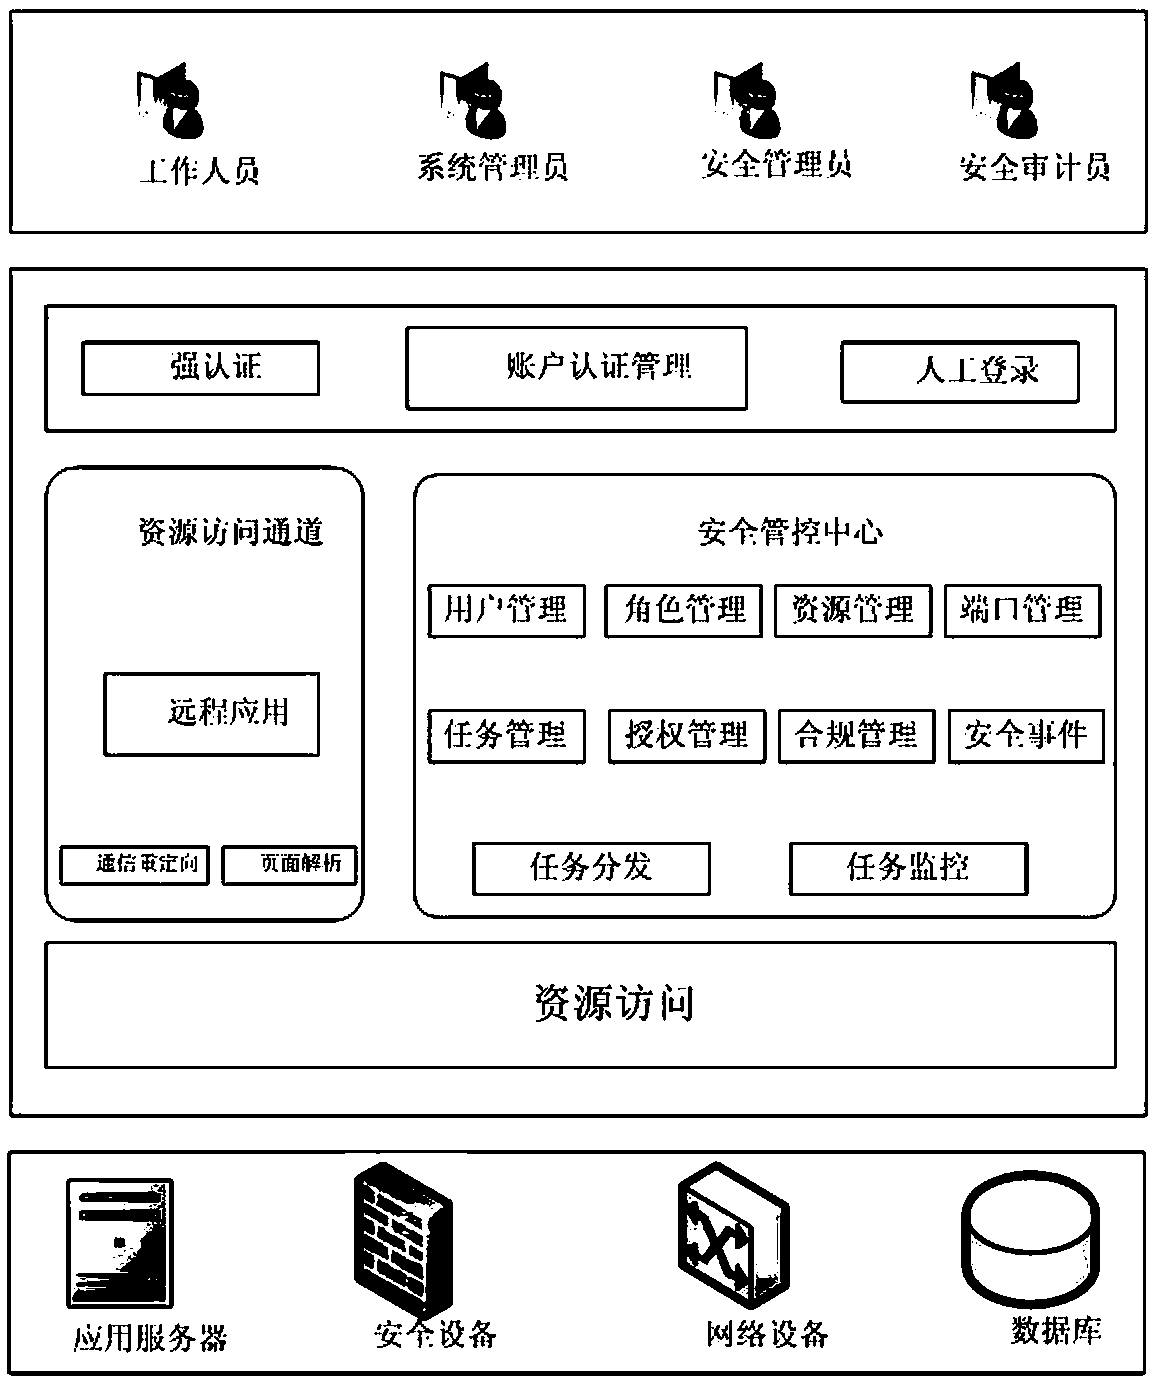 Edge computing cloud environment distributed Web page extraction and analysis system and method